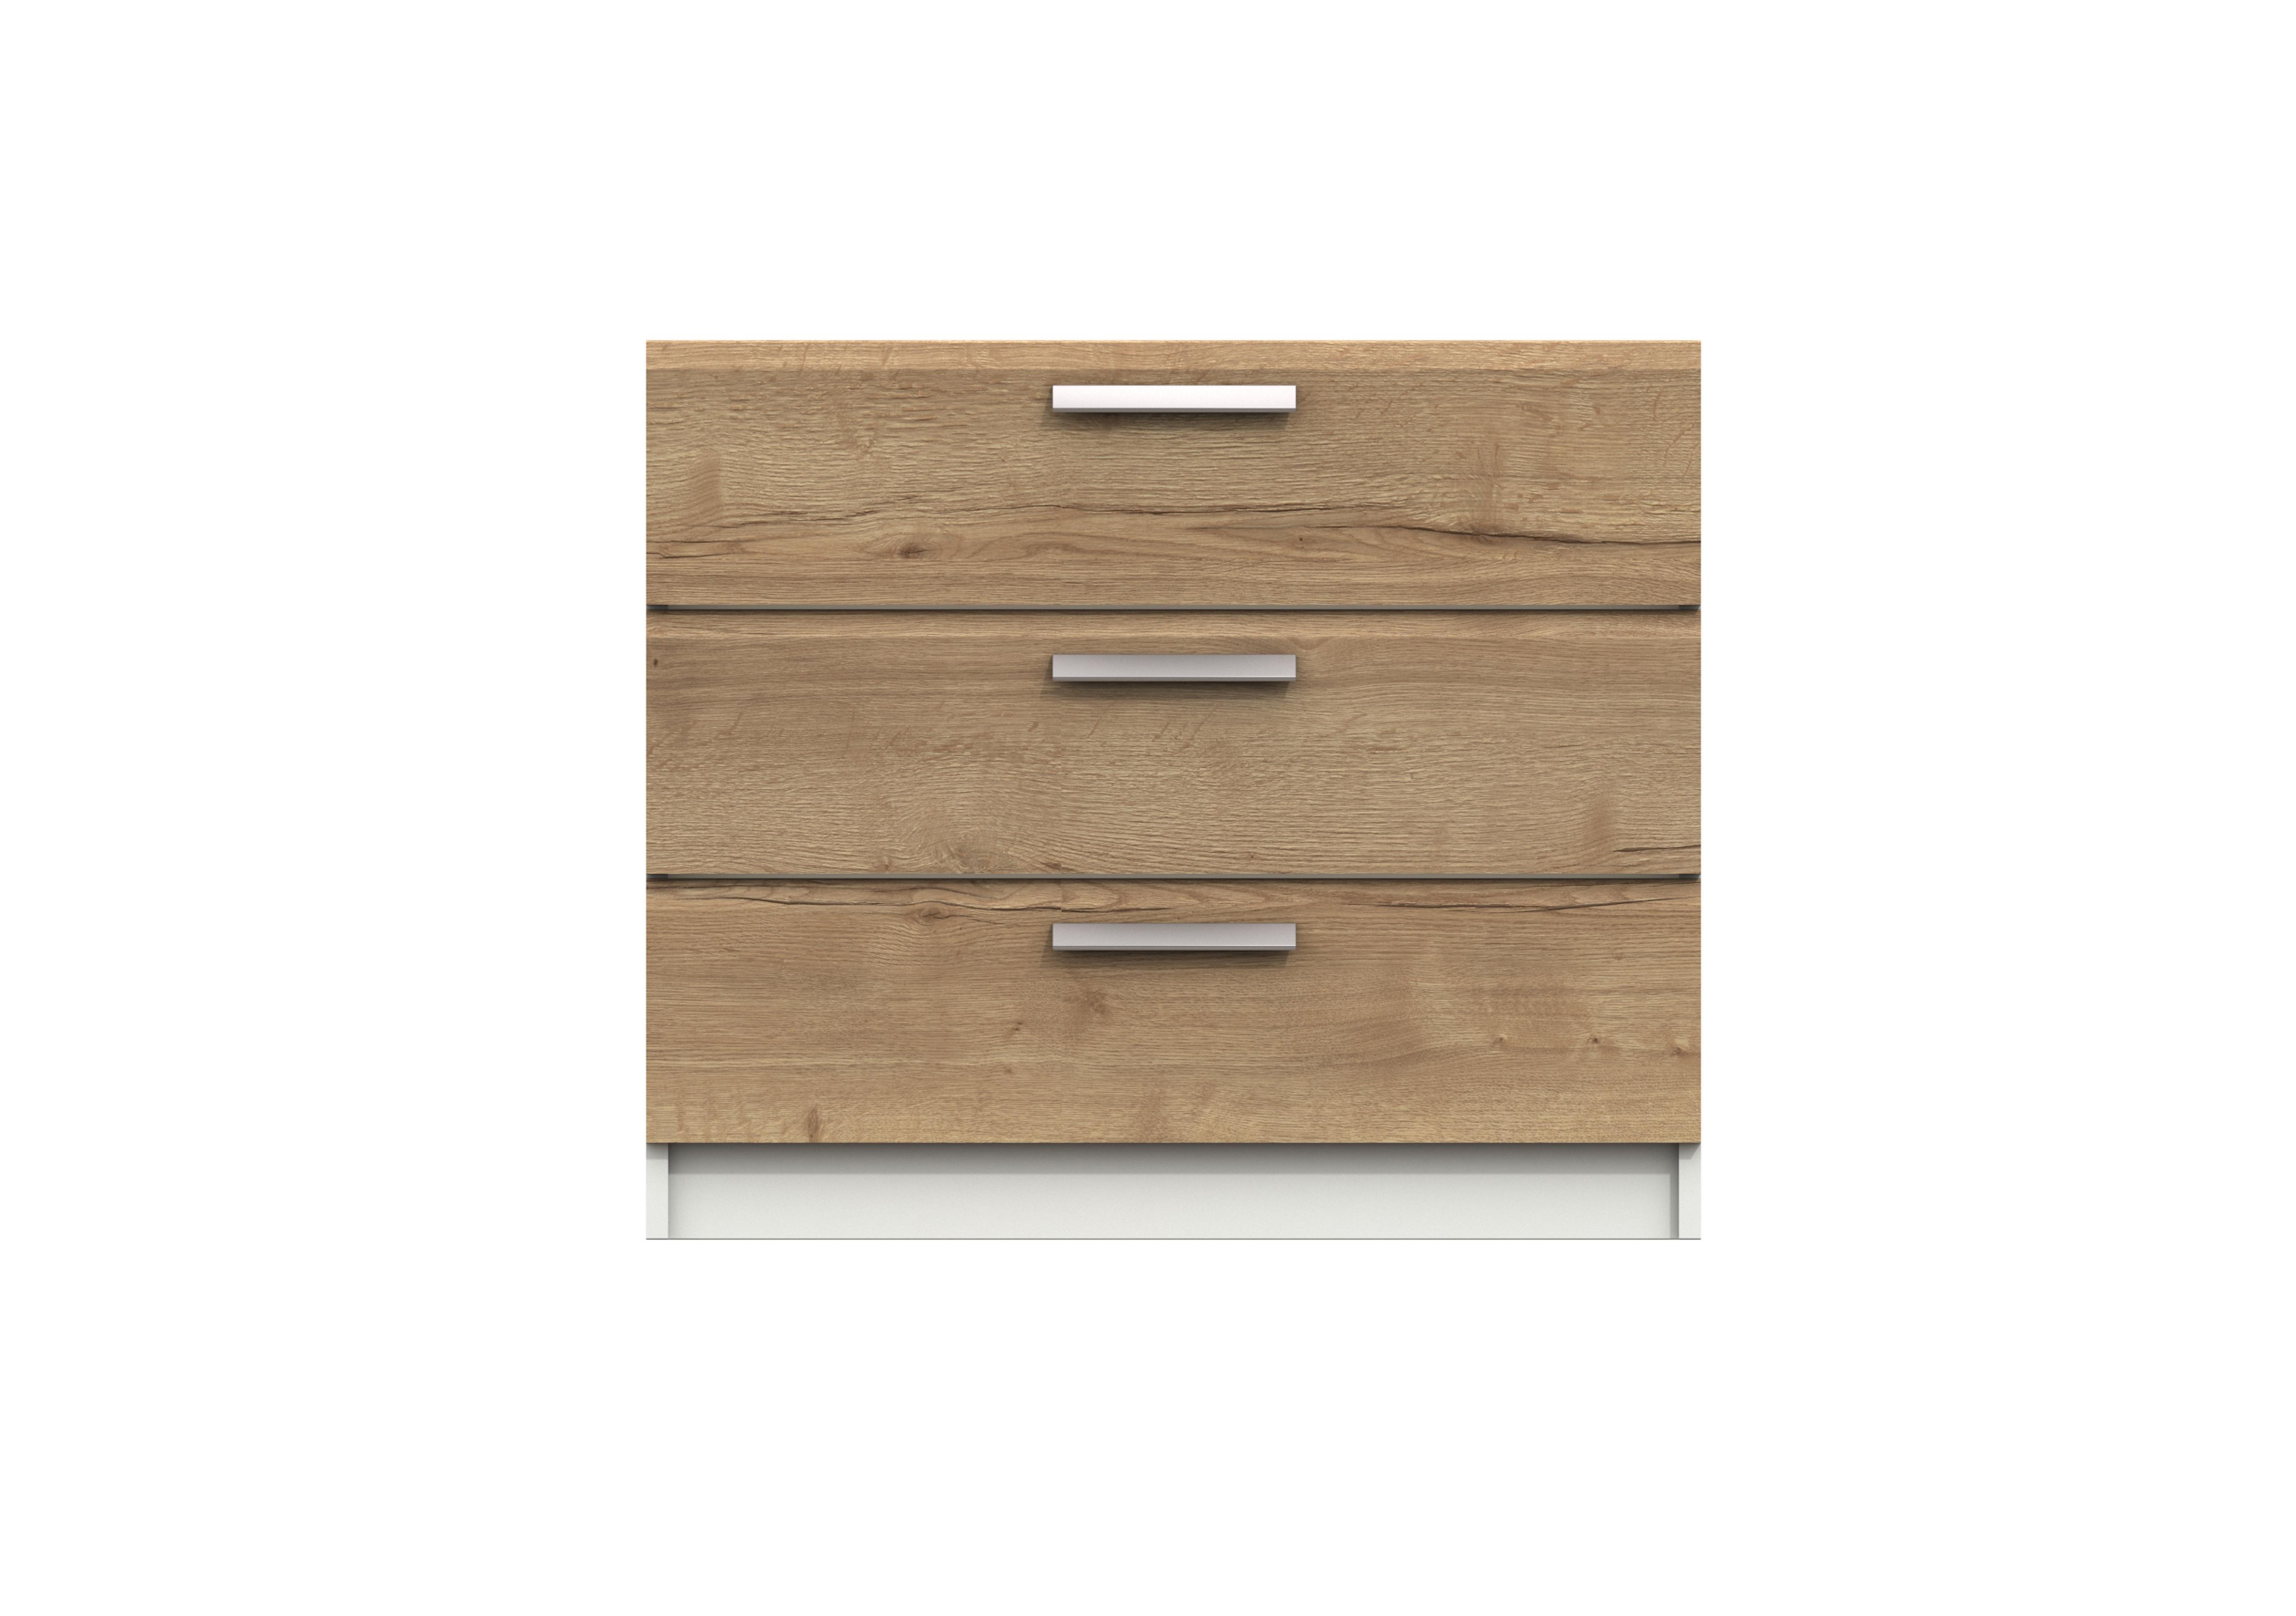 Waterloo 3 Drawer Chest in White & Natural Rustic Oak on Furniture Village